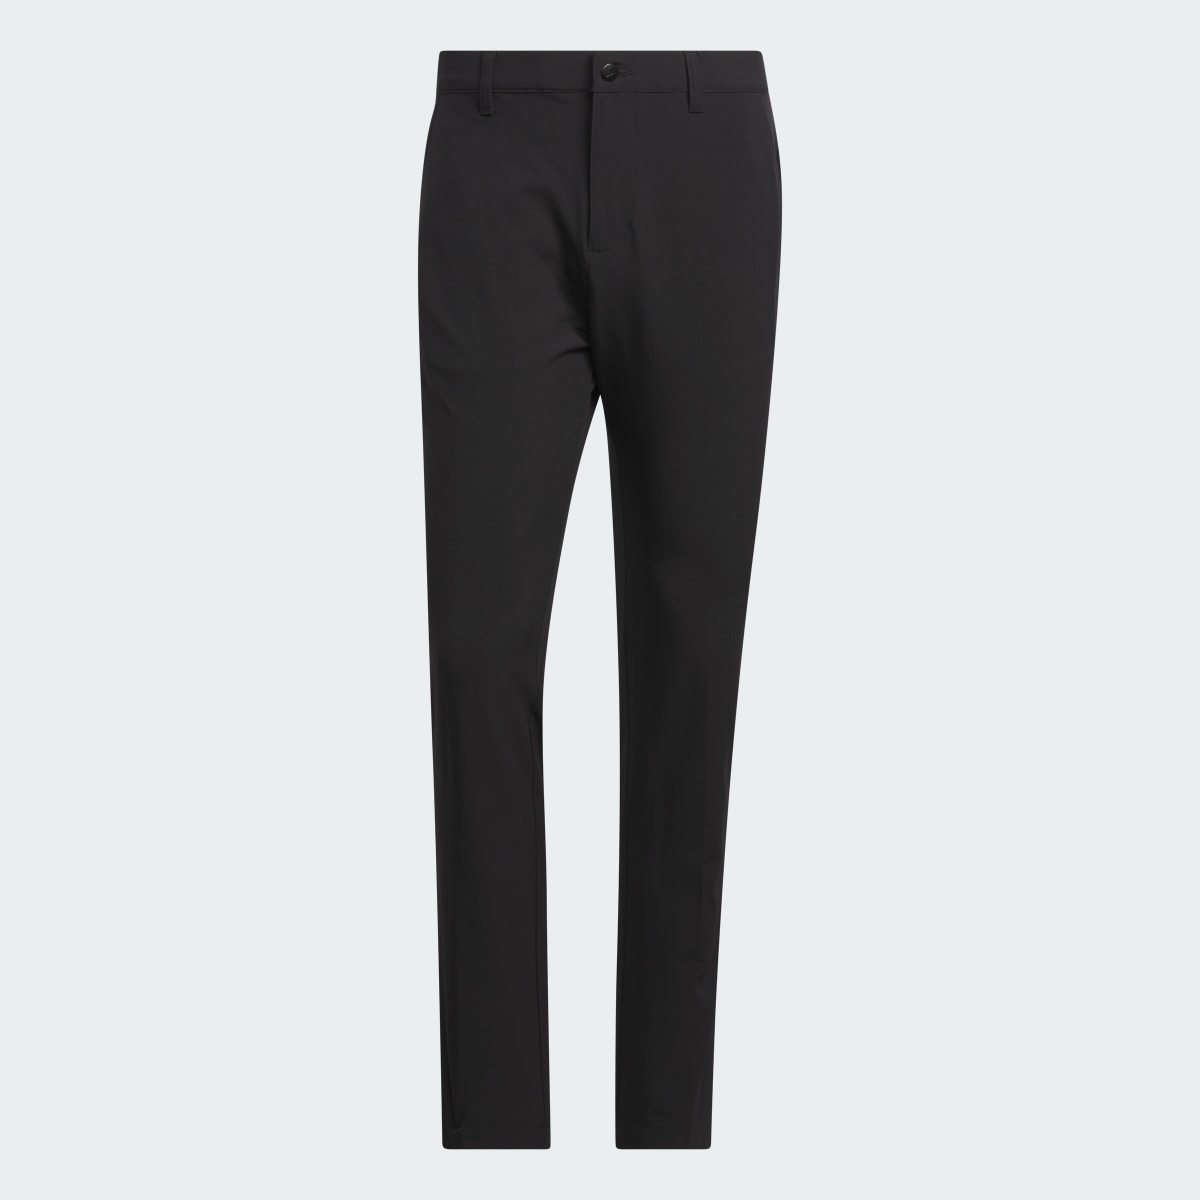 Adidas Ultimate365 Tapered Golf Pants. 4